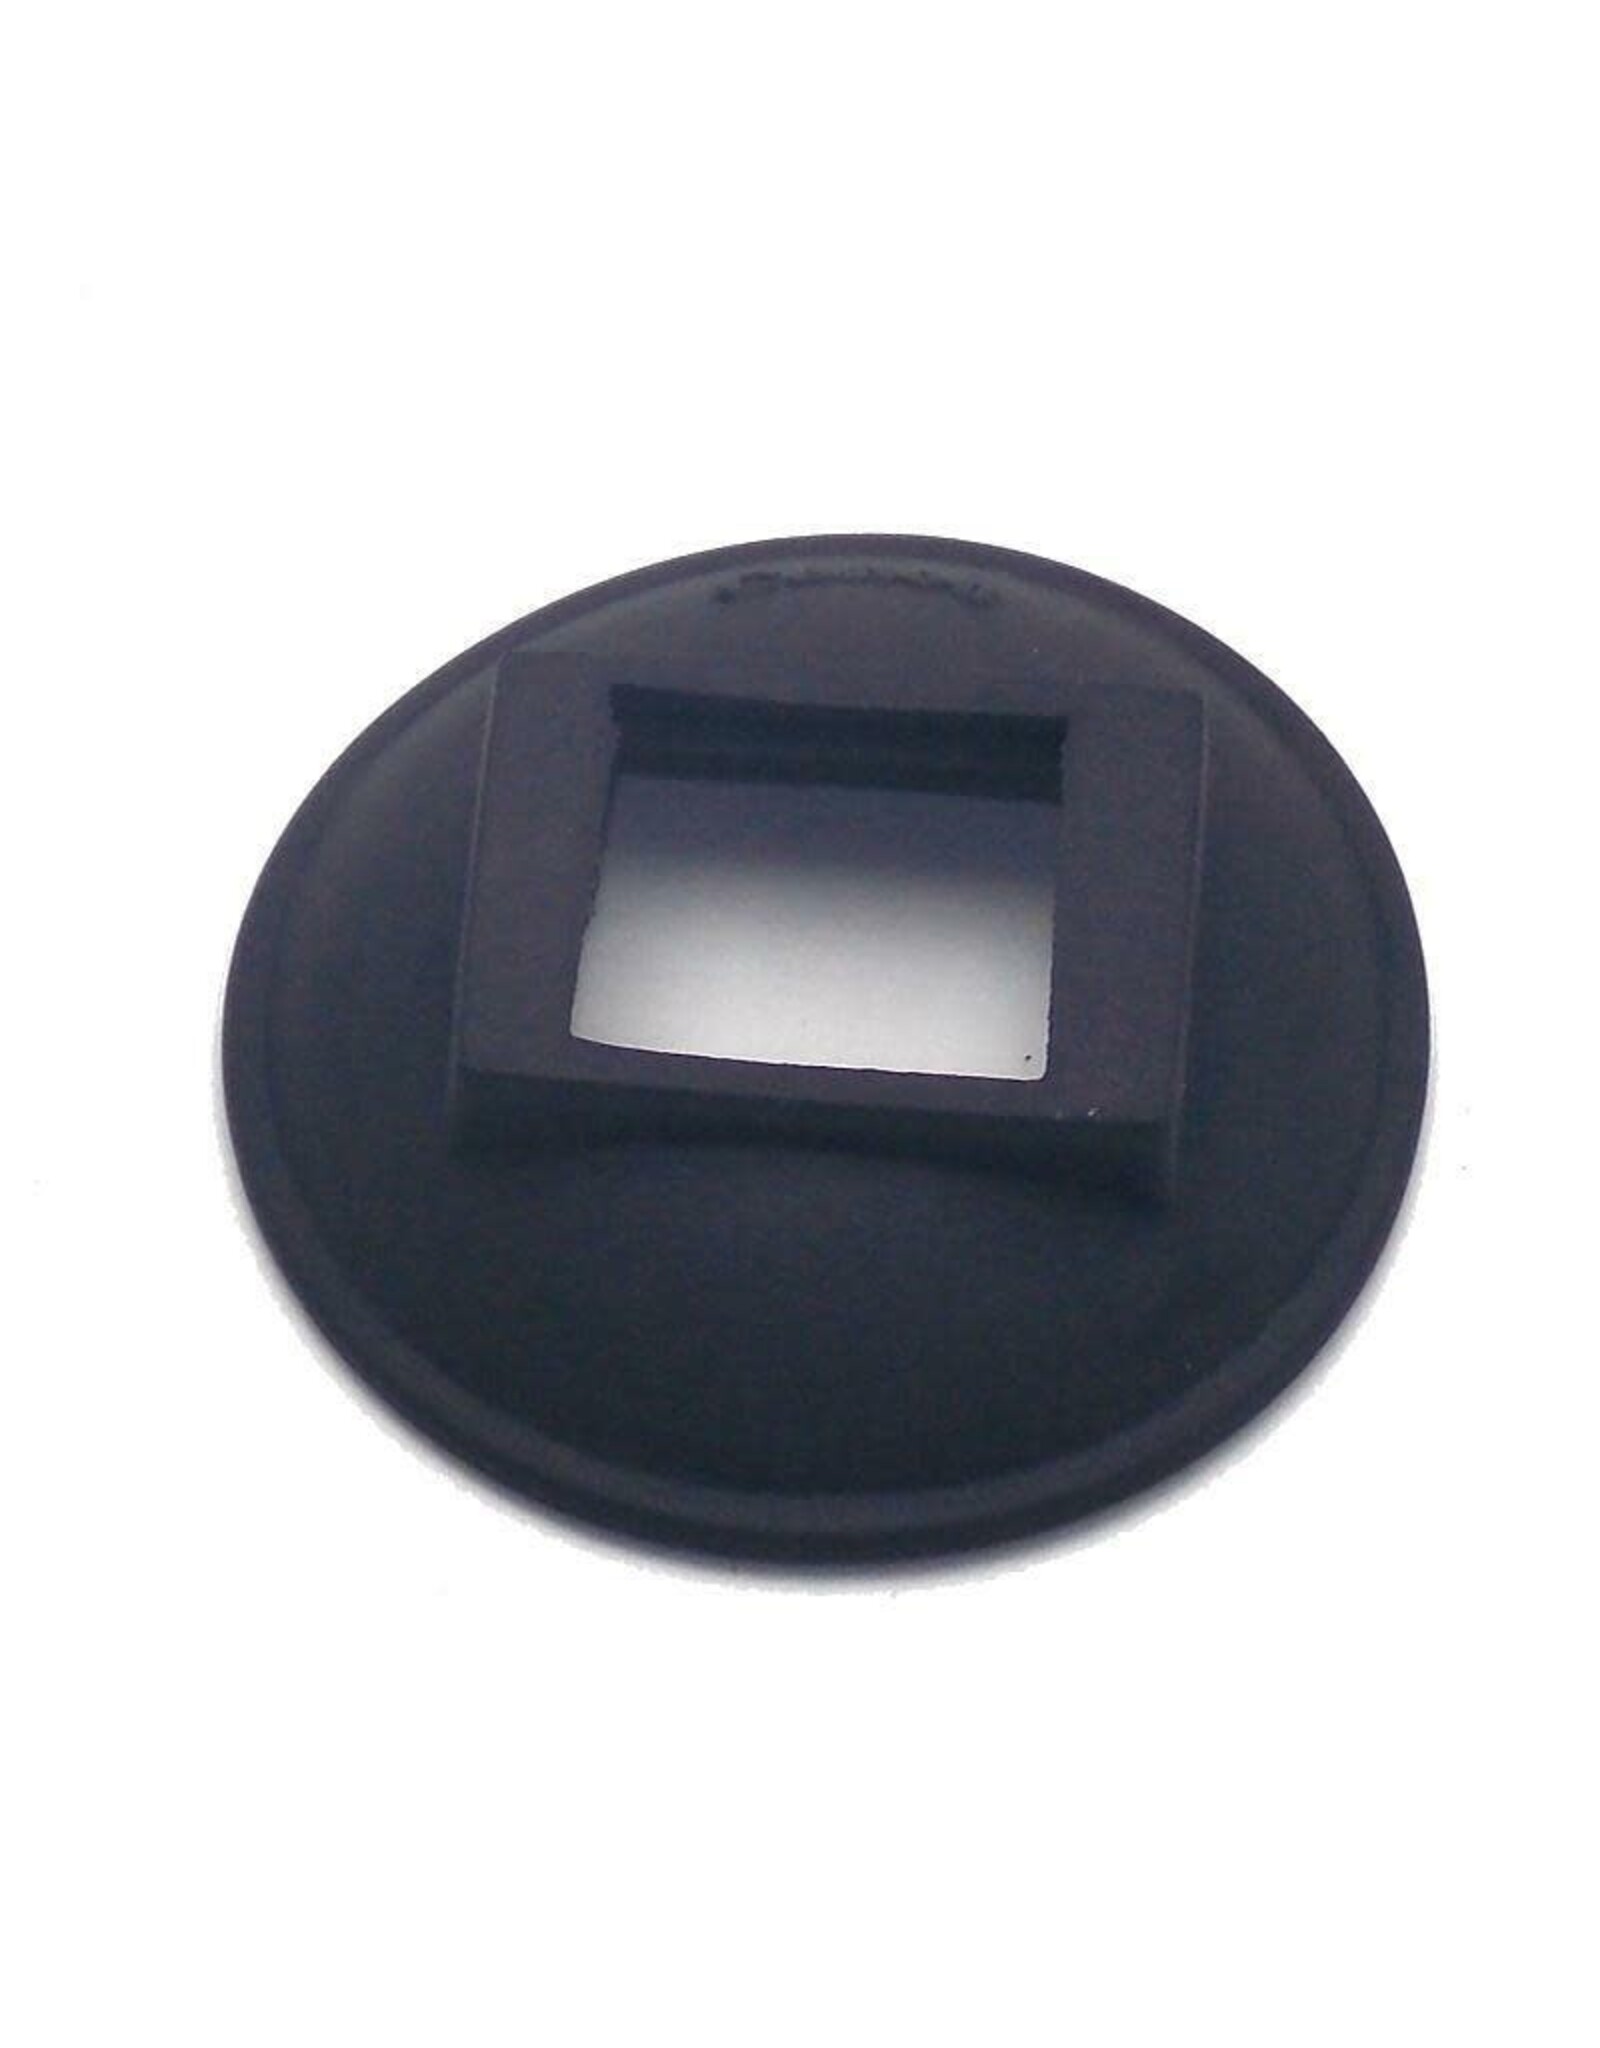 Canon Canon Original A Series (Square finder) EyecupEye Cup for A-1 AE-1 AE1 Program New